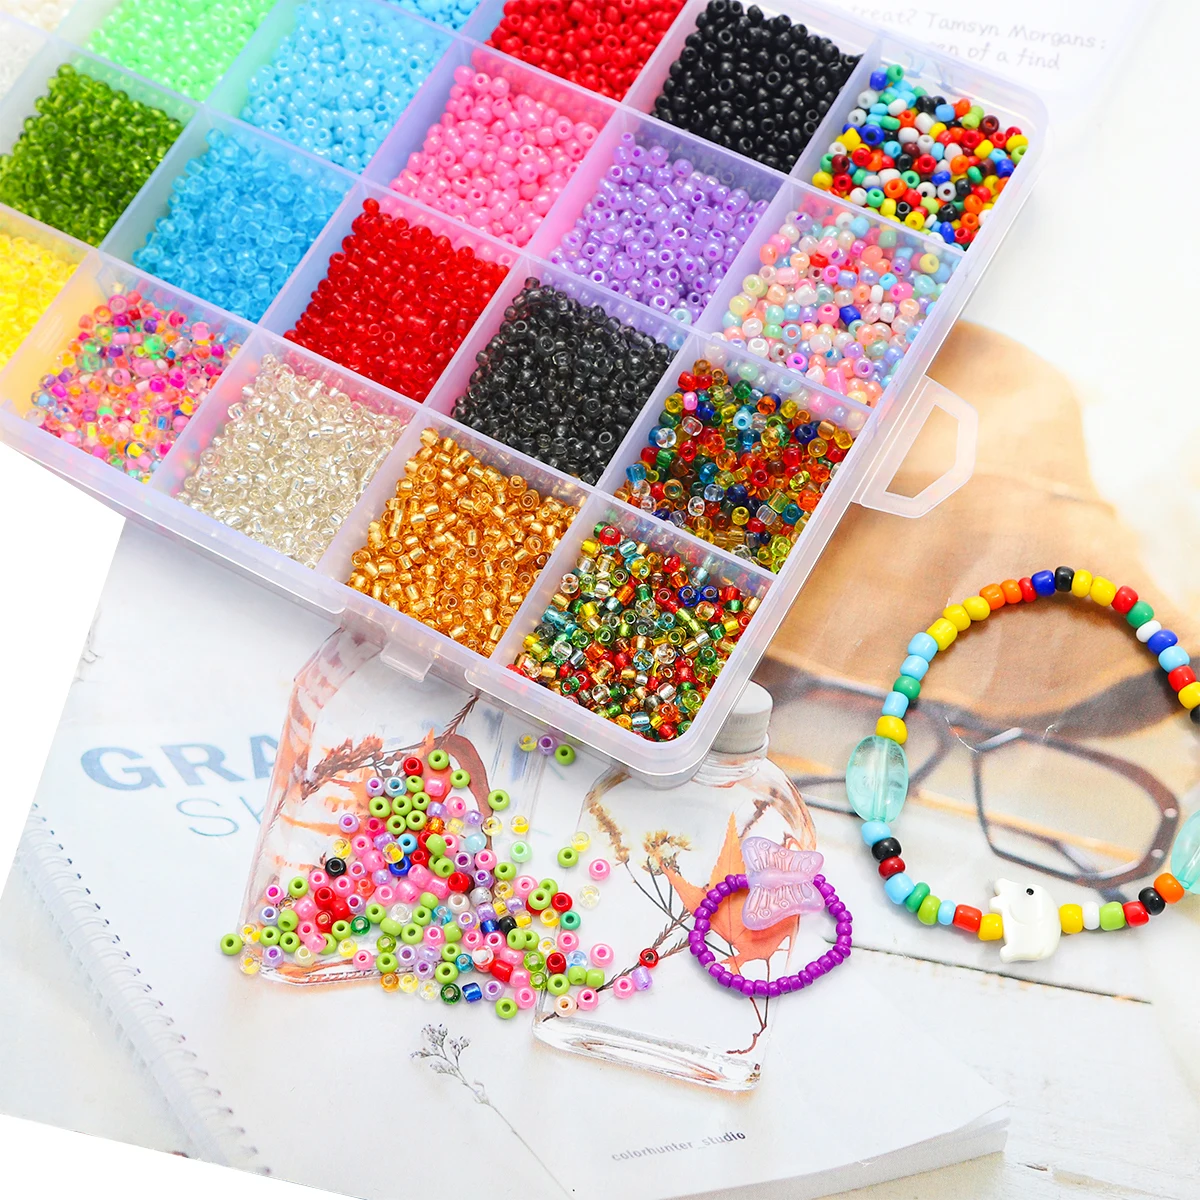 15g/Grid 24 Grids 2-3mm Seed Beads Box Set  from Cream Color to Silver Filling Series for Jewelry DIY Making Necklaces Bracelets